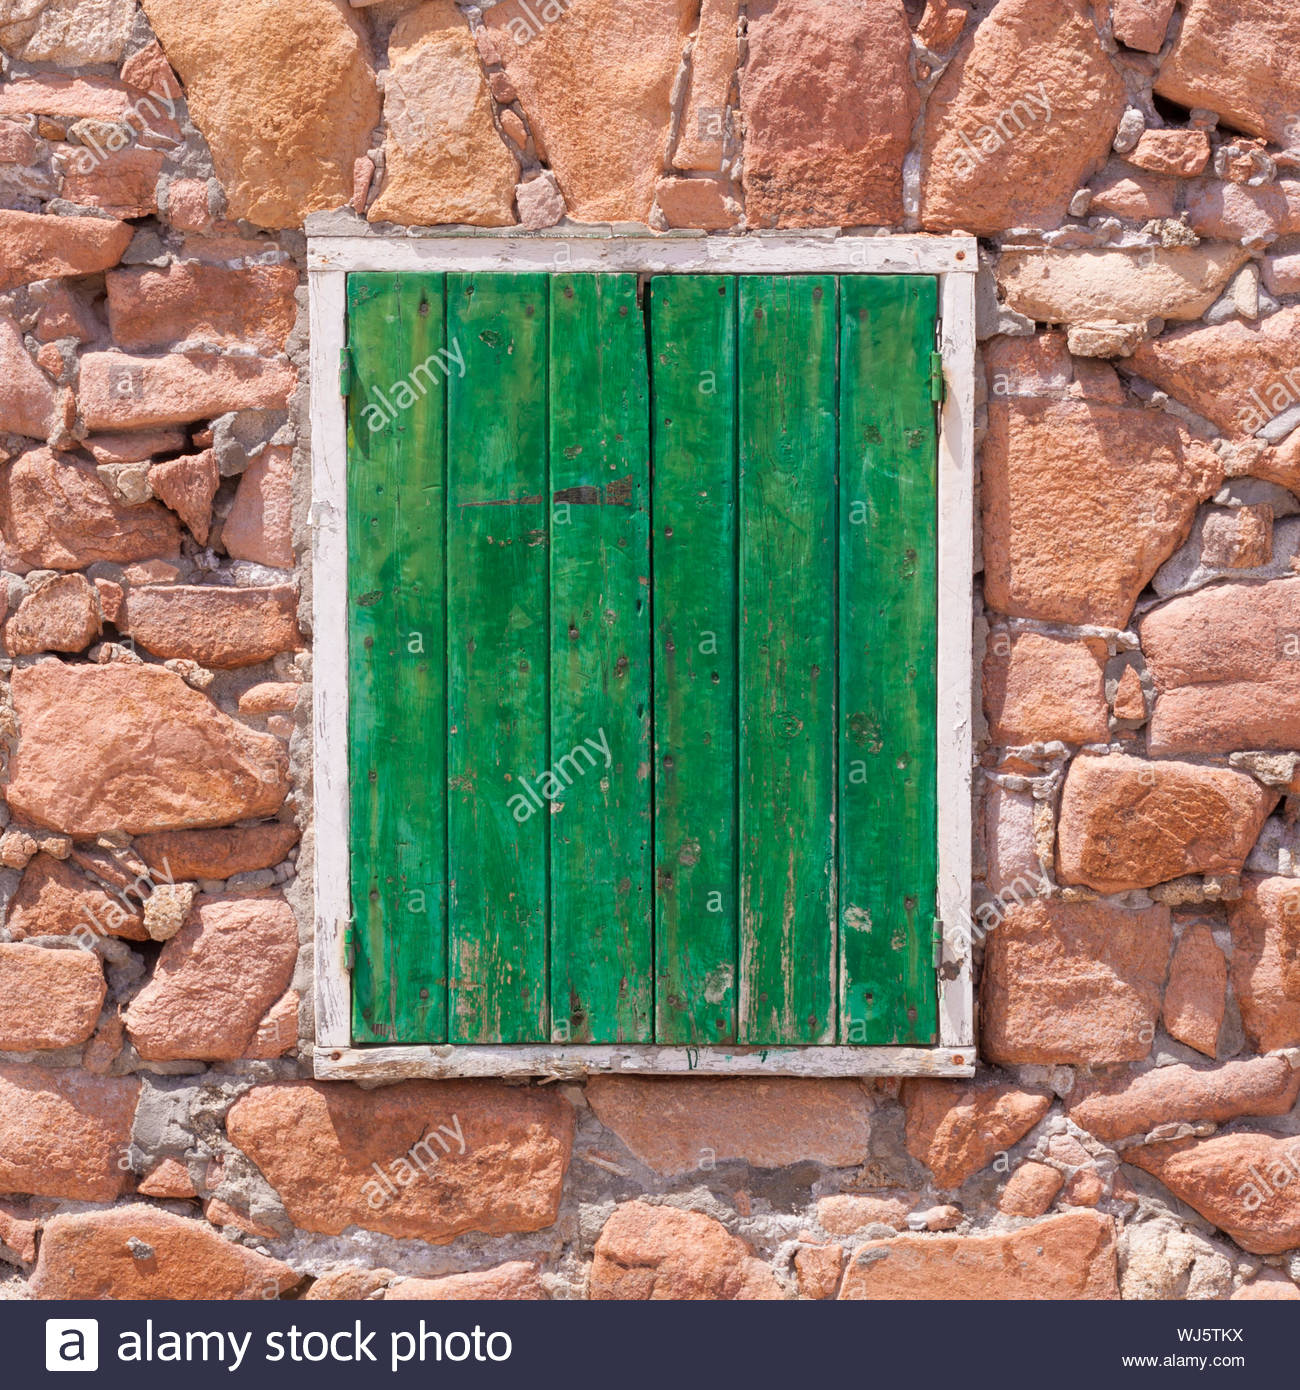 Aged Grunge Weathered Green Window Shutter Can Be Used As A